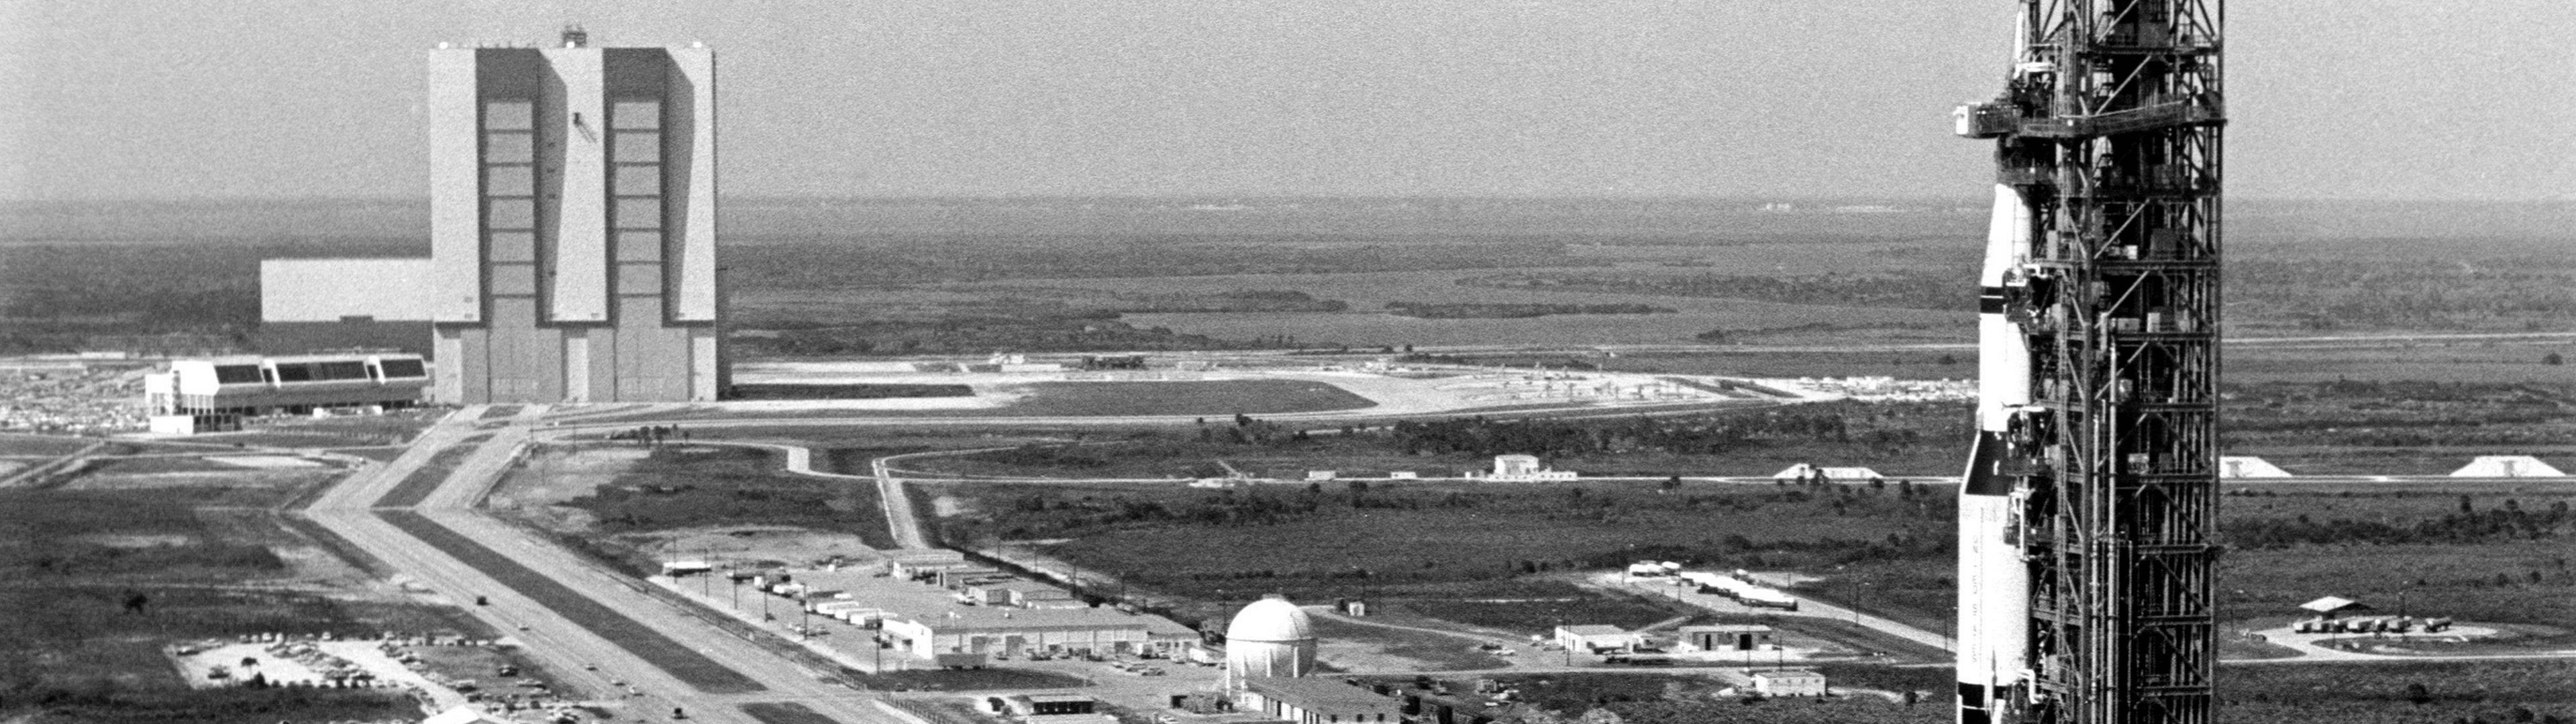 General 3839x1079 Saturn V launch pads history multiple display USA landscape monochrome Apollo program 1969 (Year) panorama ultrawide Kennedy Space Center NASA Florida